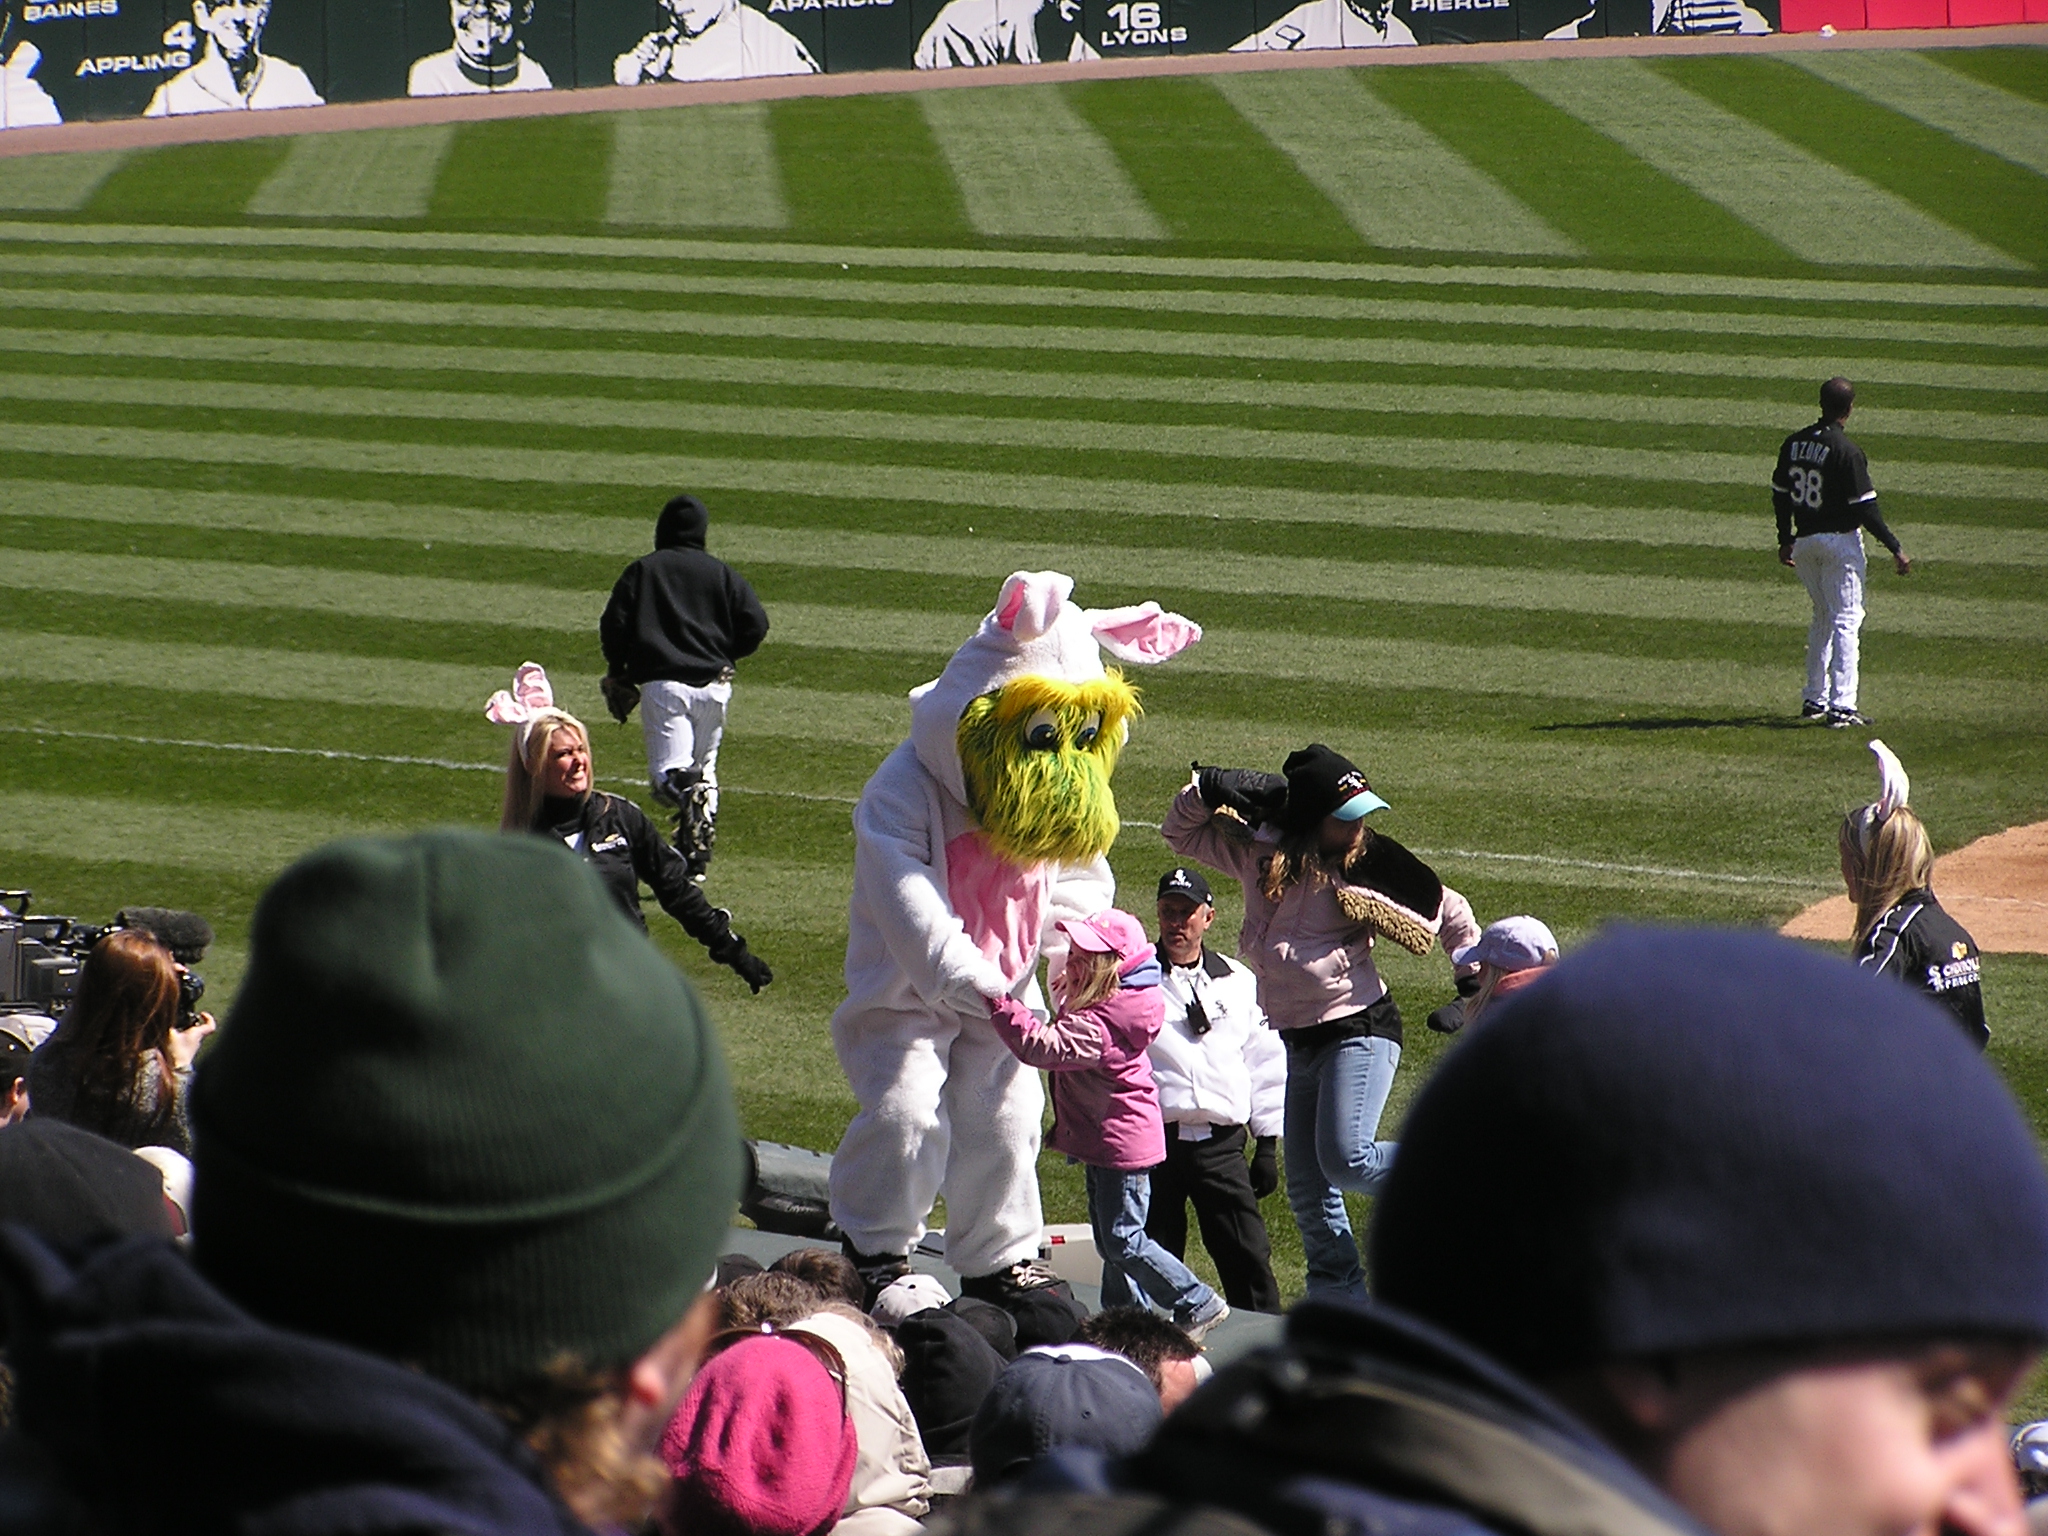 SouthPaw dancing on Easter Sunday - U.S. Cellular